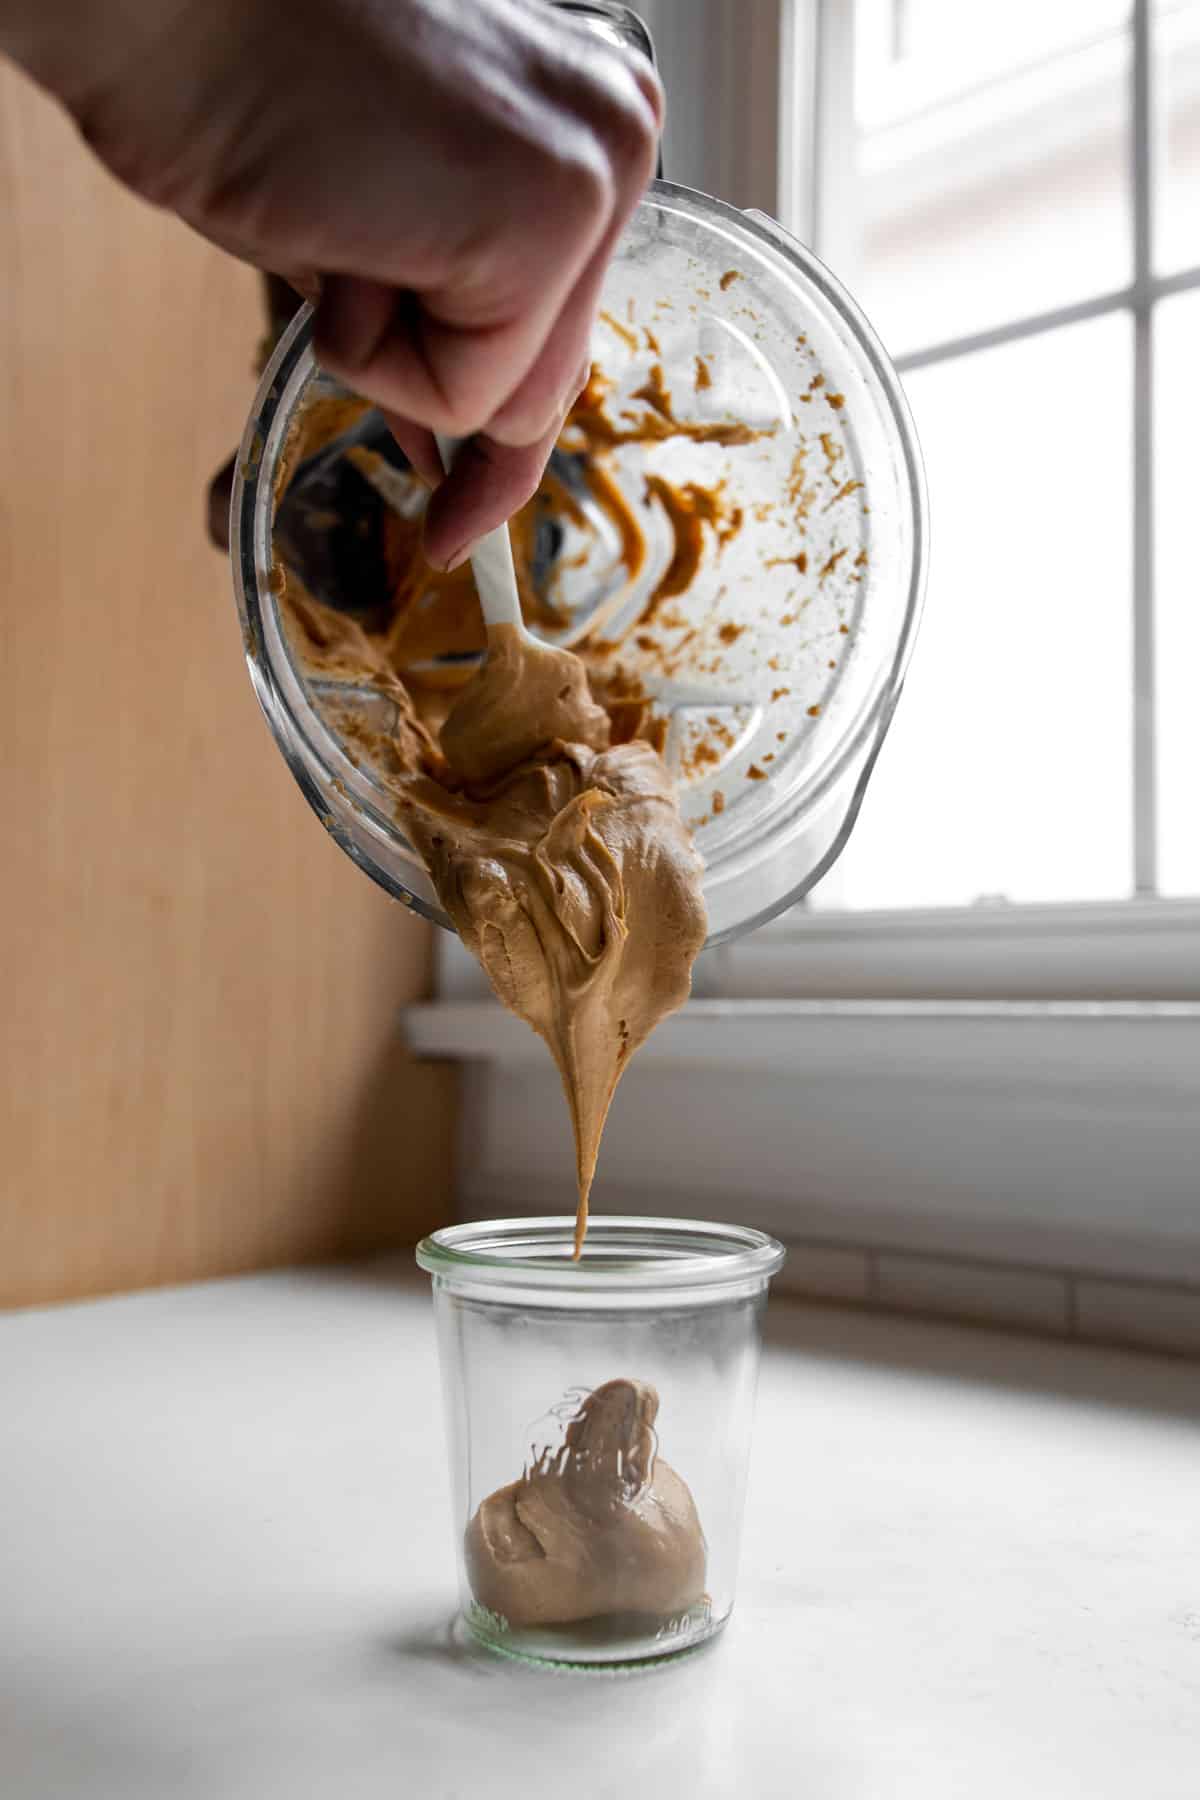 Transferring cashew butter from a blender container to a glass jar in front of a window.